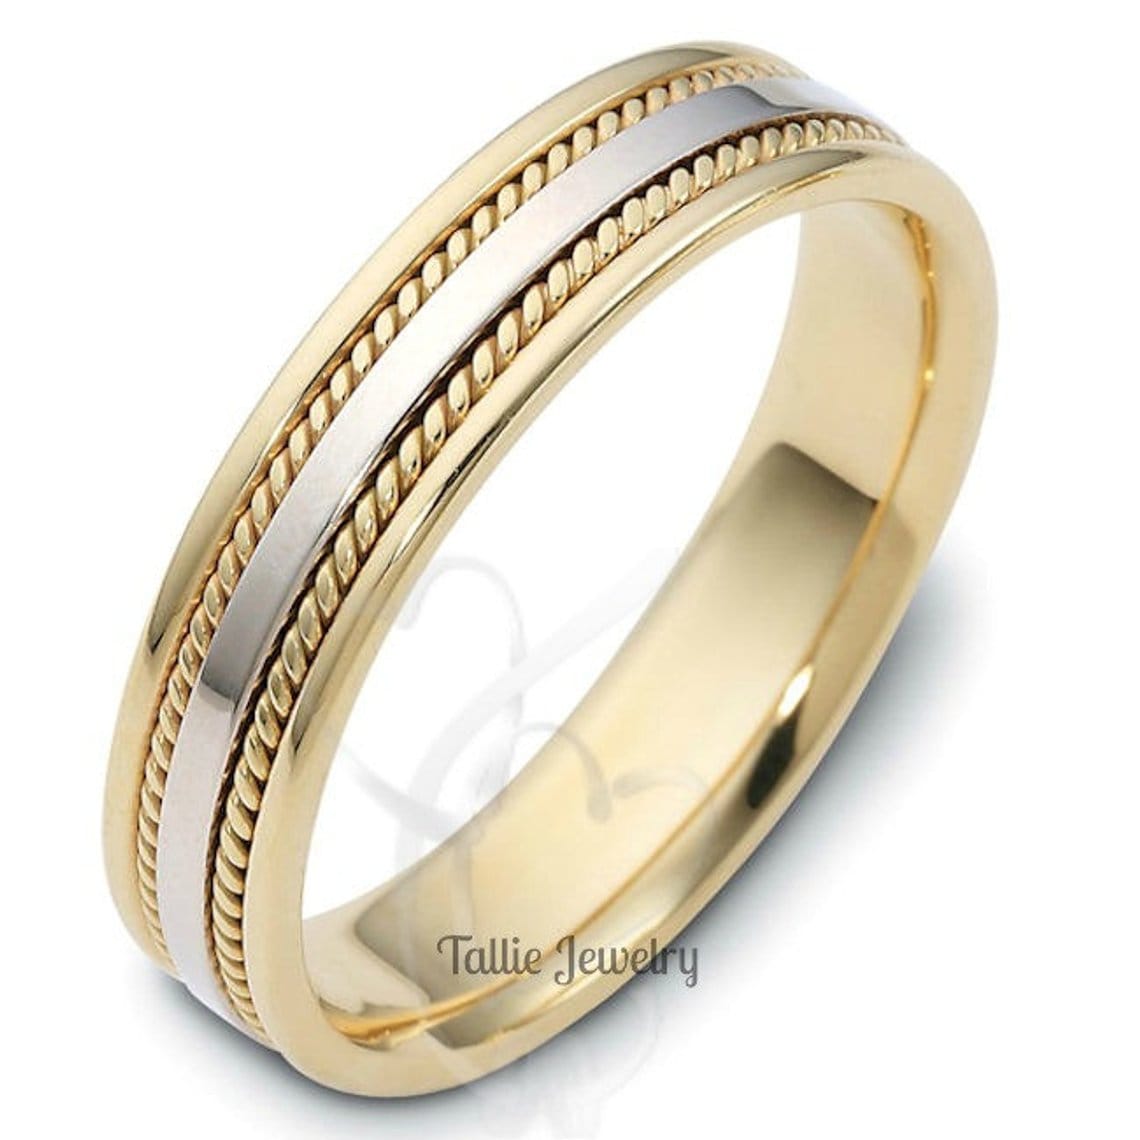 Unique Braided Men's Wedding Band Two-Tone 14K White Gold & Yellow Gold Ring  - Camellia Jewelry